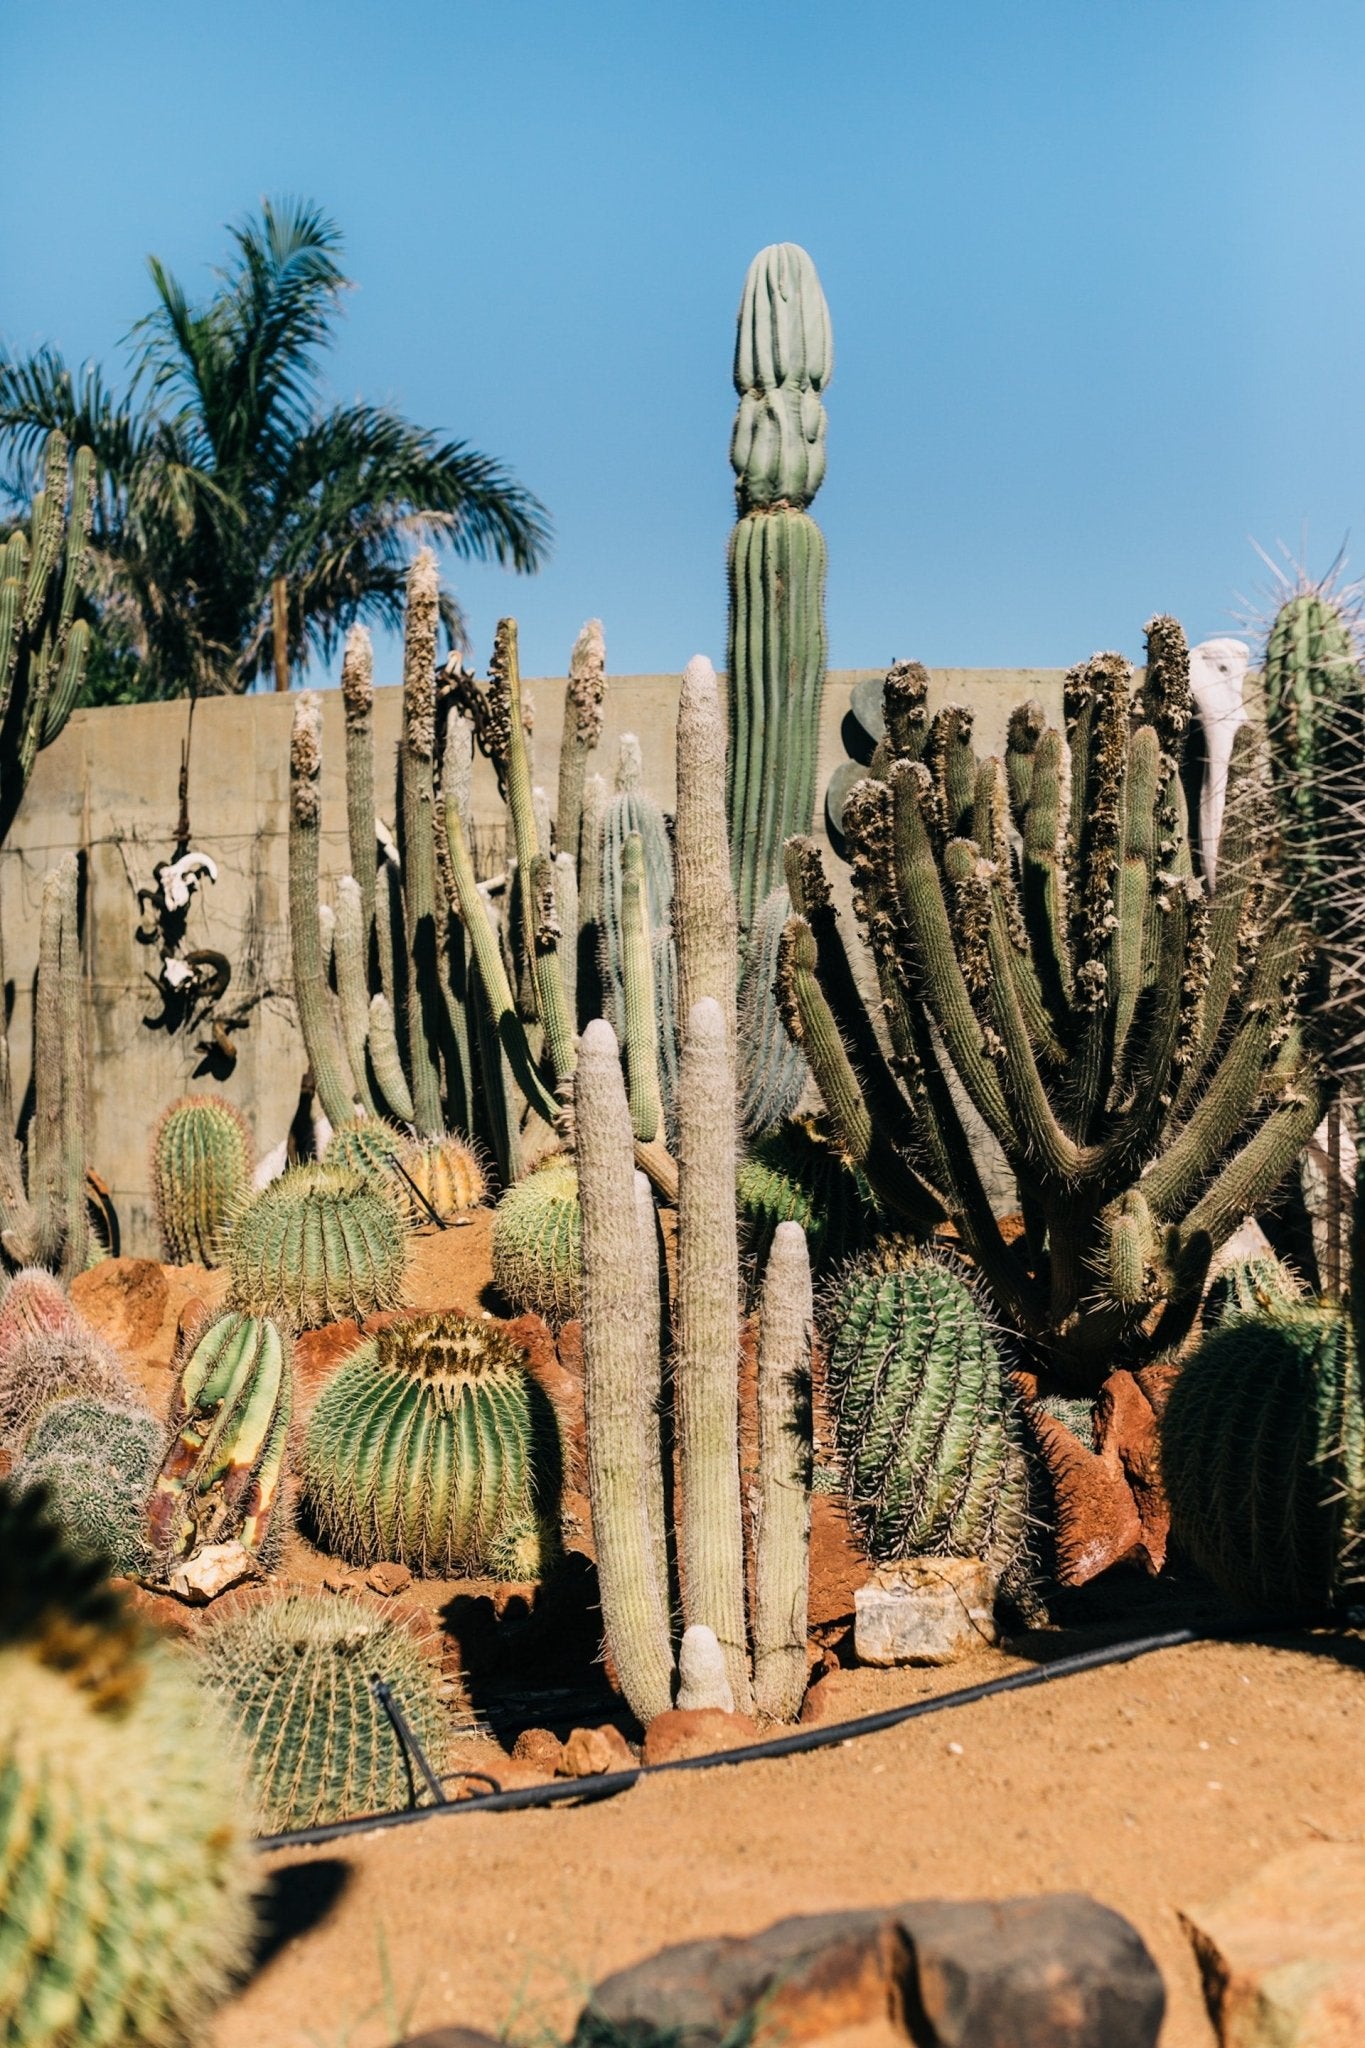 Xeriscaping: What is it and how is it Different From Zero Landscaping? - Varnish + Vine